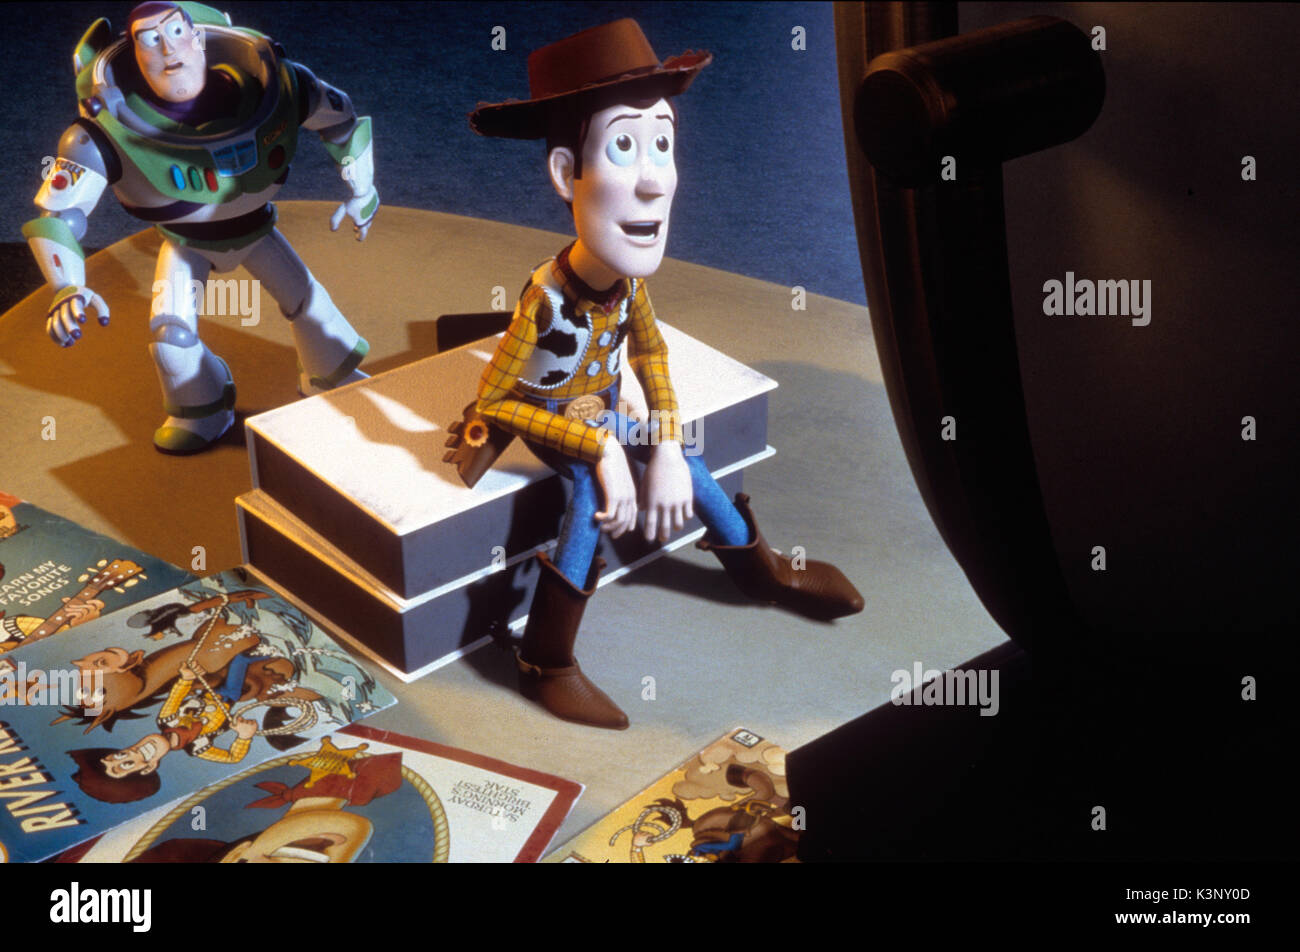 TOY STORY 2 [US 1999] Buzz Lightyear voiced by Tim Allen, Woody voiced by Tom Hanks     Date: 1999 Stock Photo